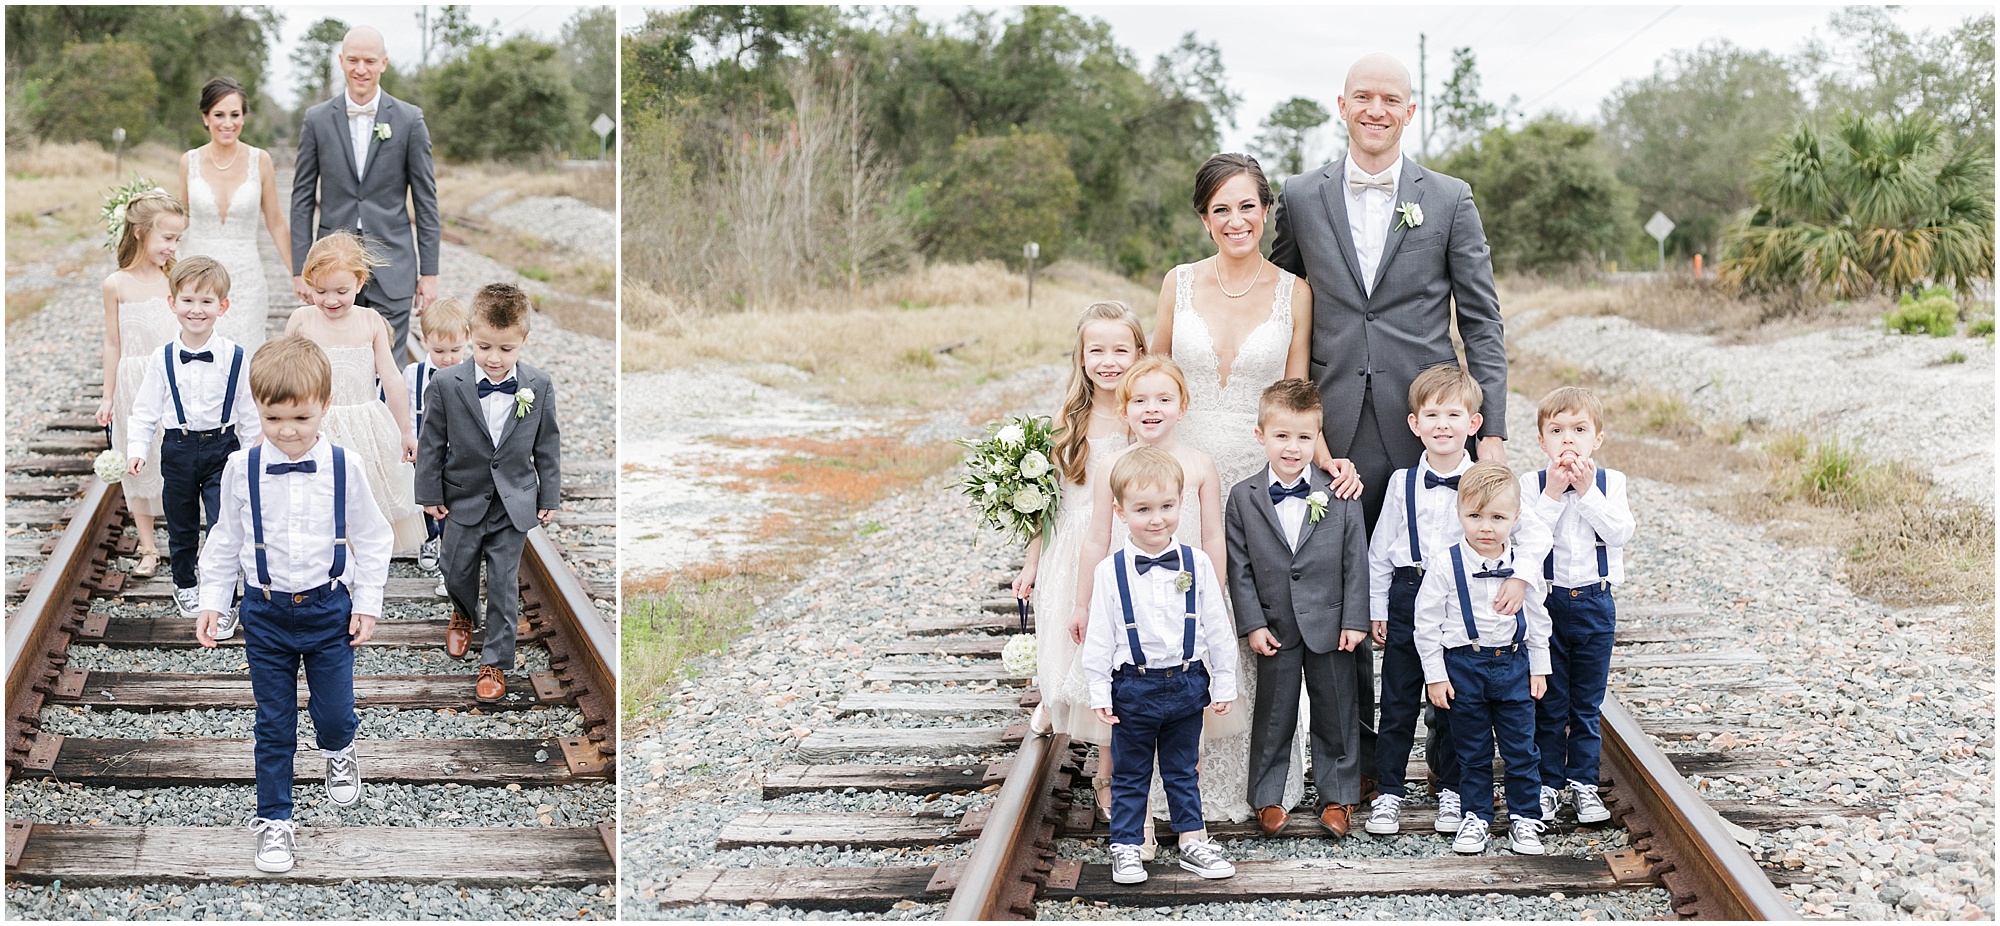 Bride and groom taking pictures with the kids in their wedding party on abandoned railroad tracks.